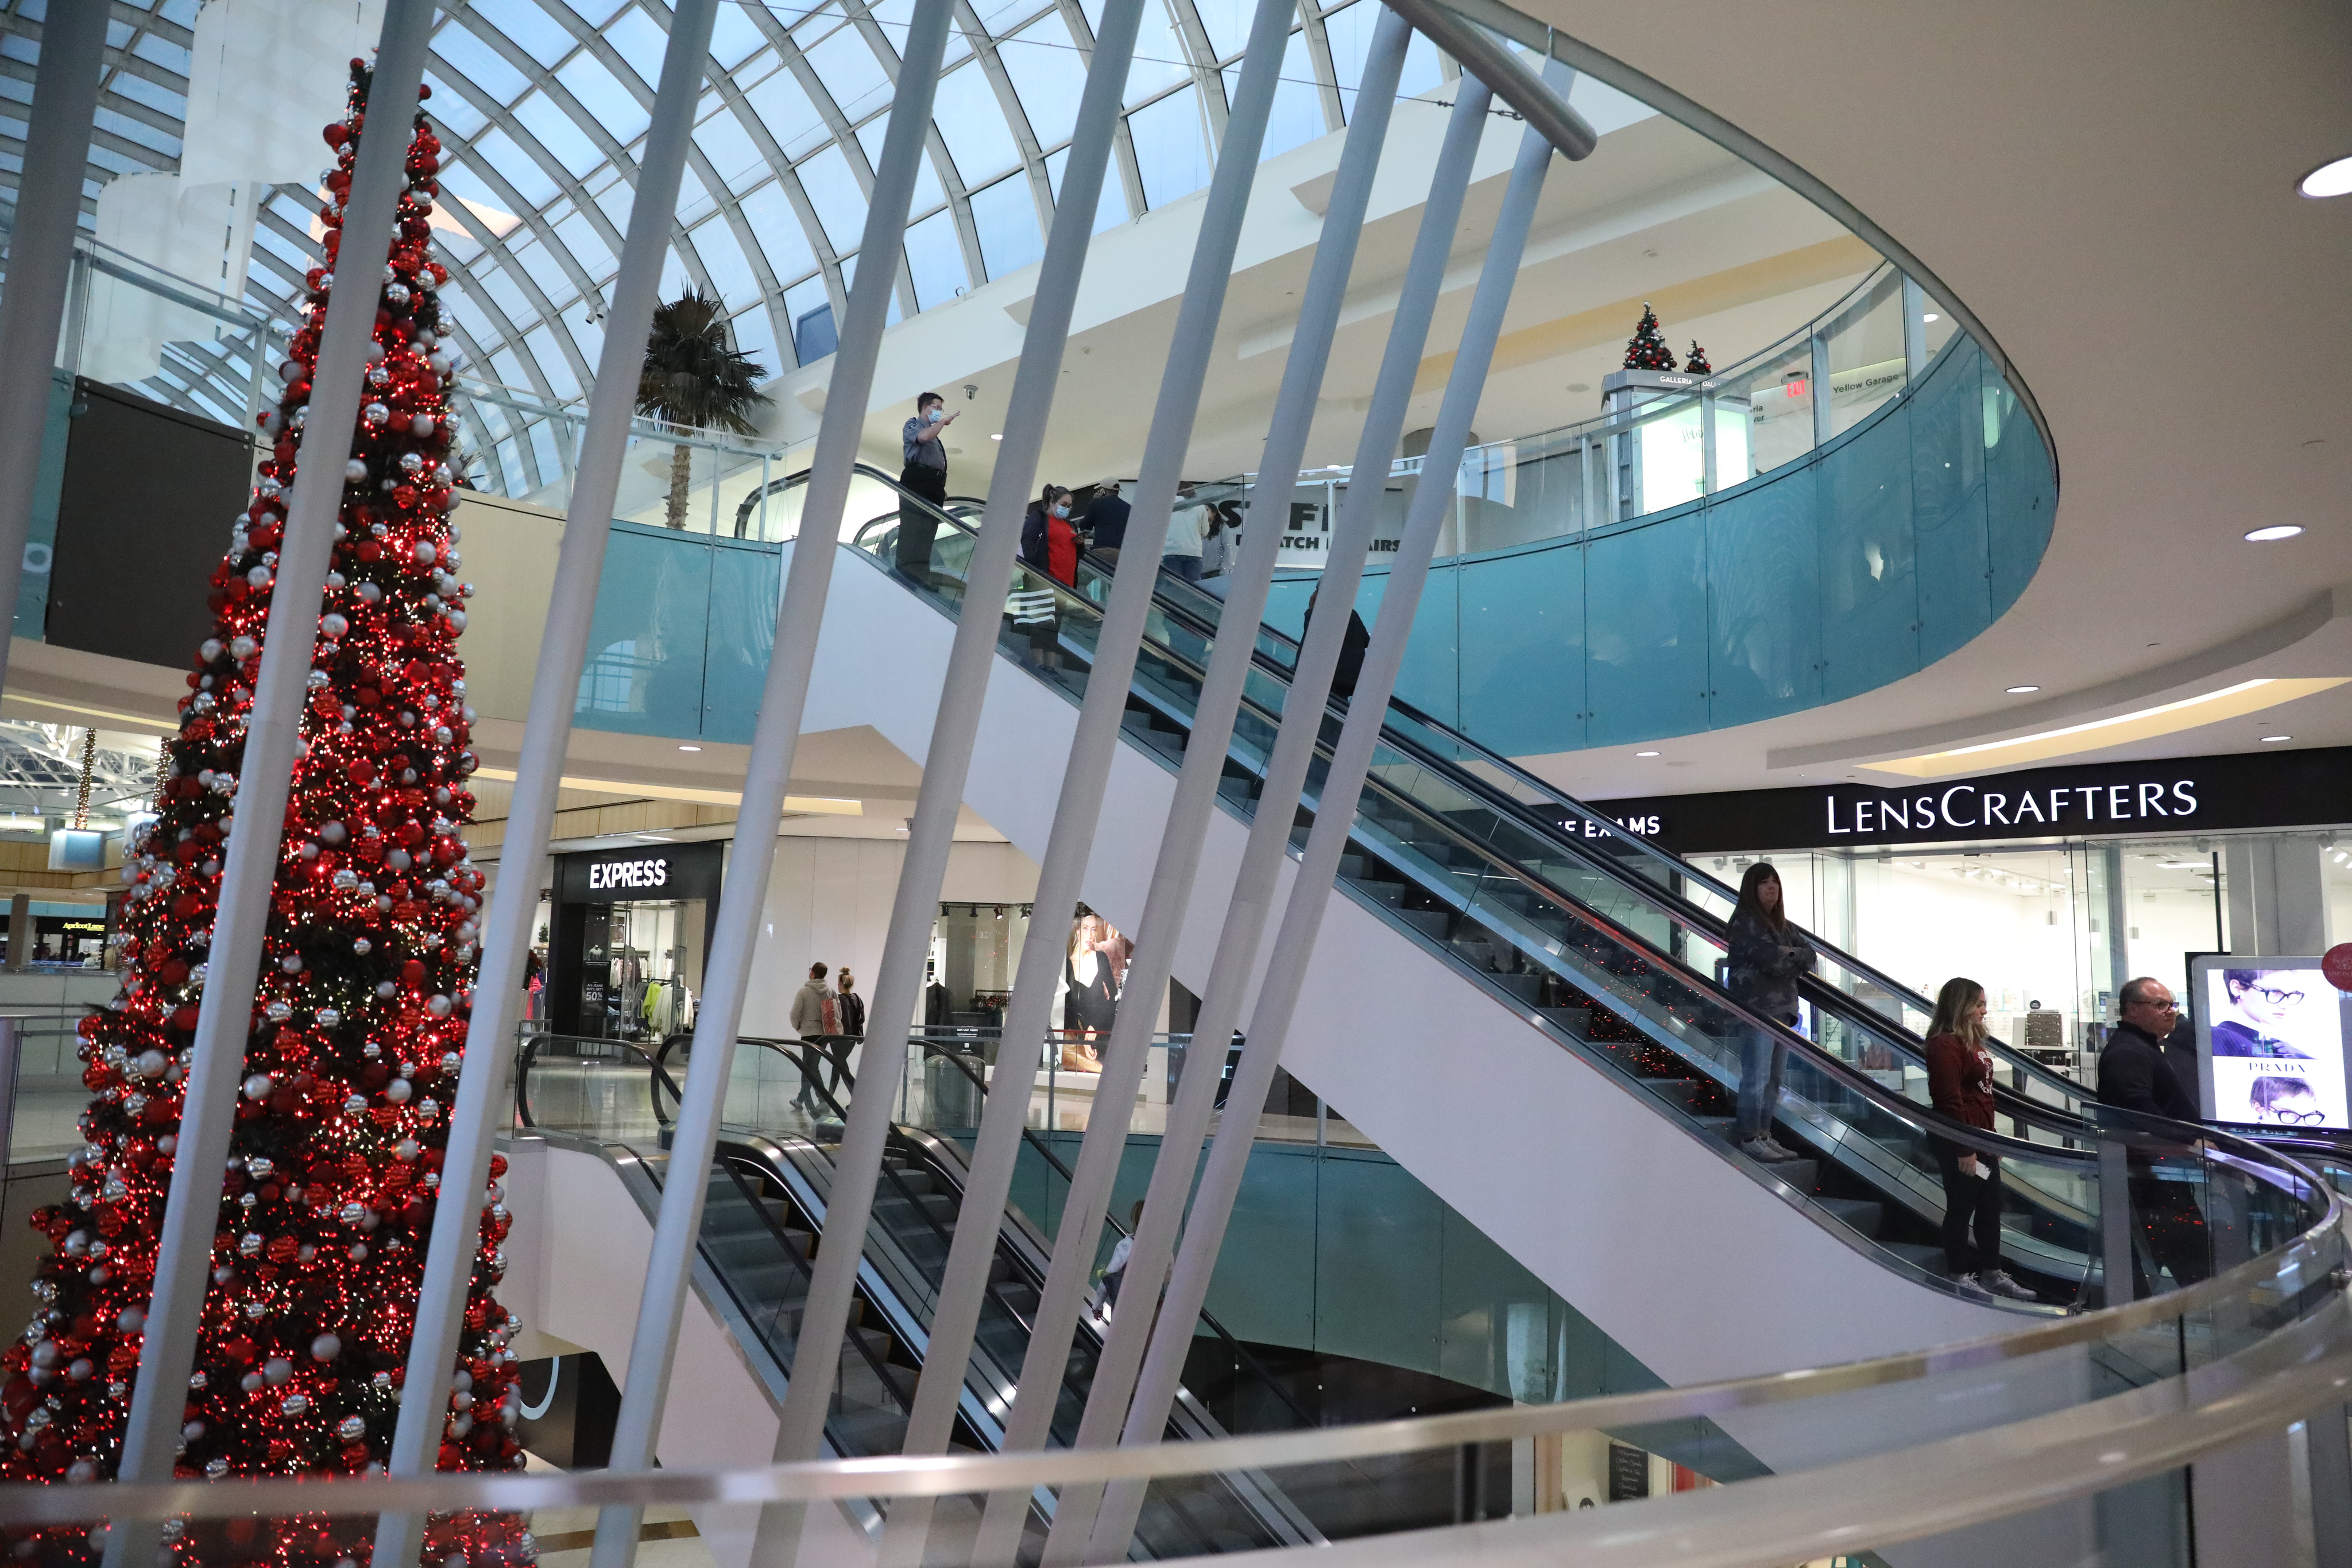 Dallas, TX : Complete Weekend in the Galleria Mall +